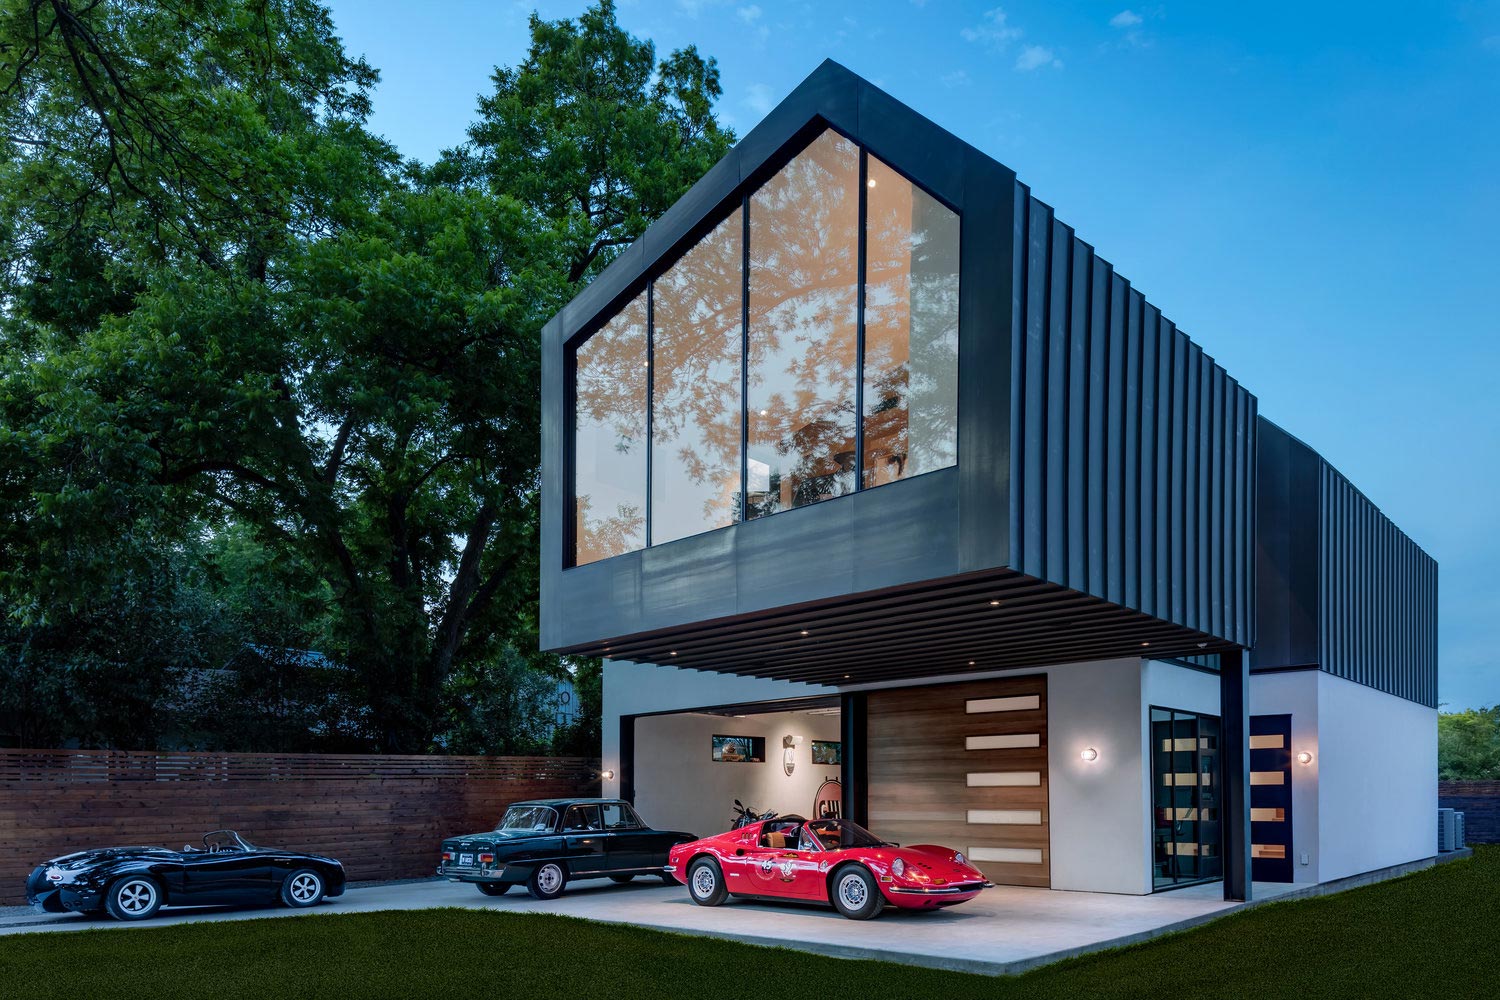 Matt Fajkus Designs The Autohaus A Asymmetric House And Showroom In Central Texas Caandesign Architecture And Home Design Blog